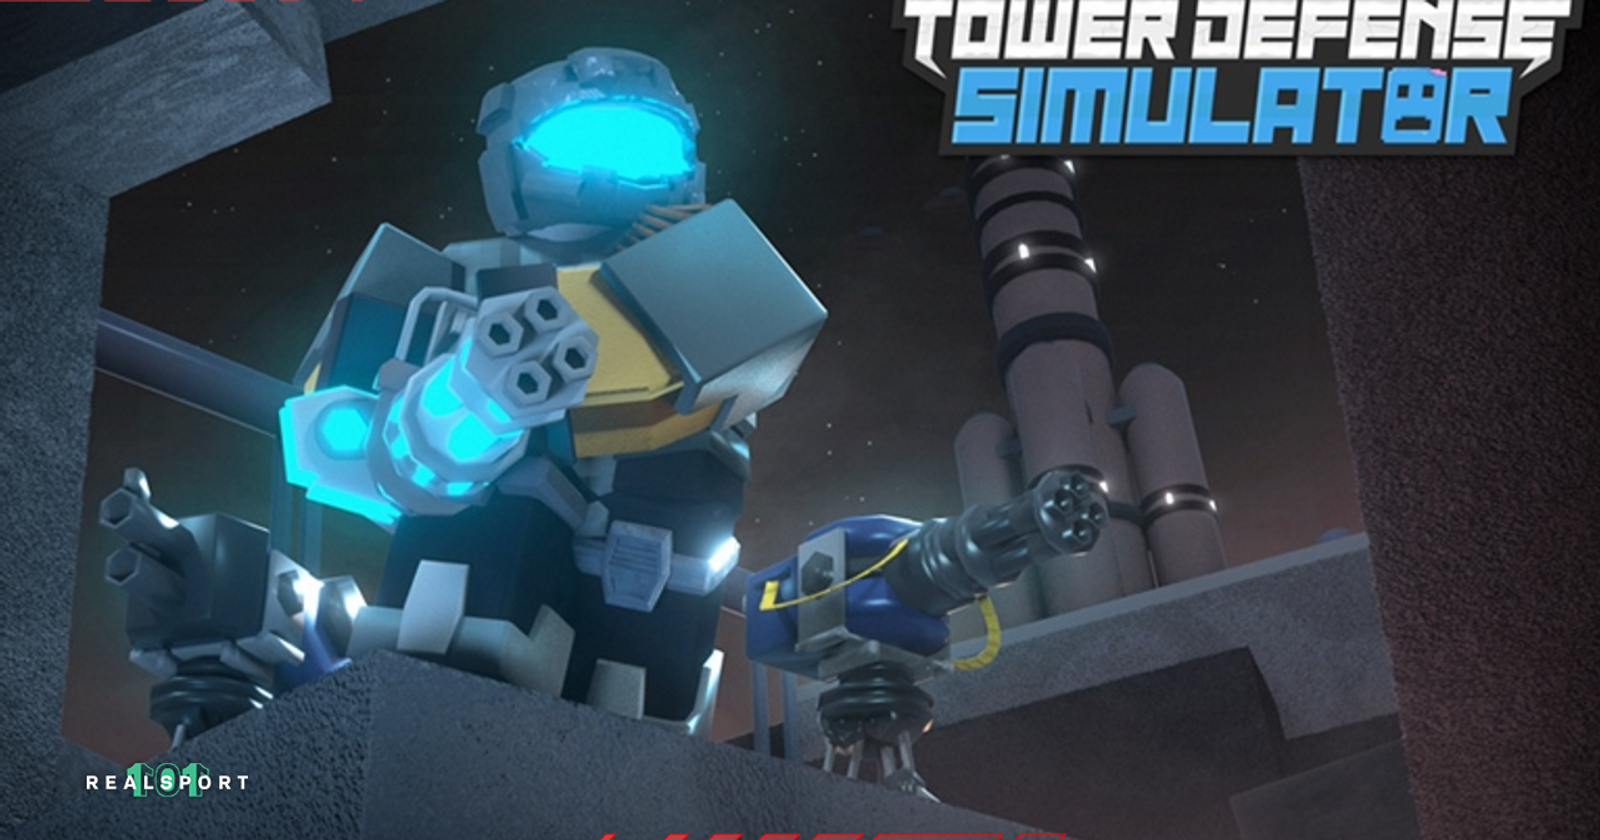 Roblox Tower Defense Simulator codes (January 2023): Free Scout and skin